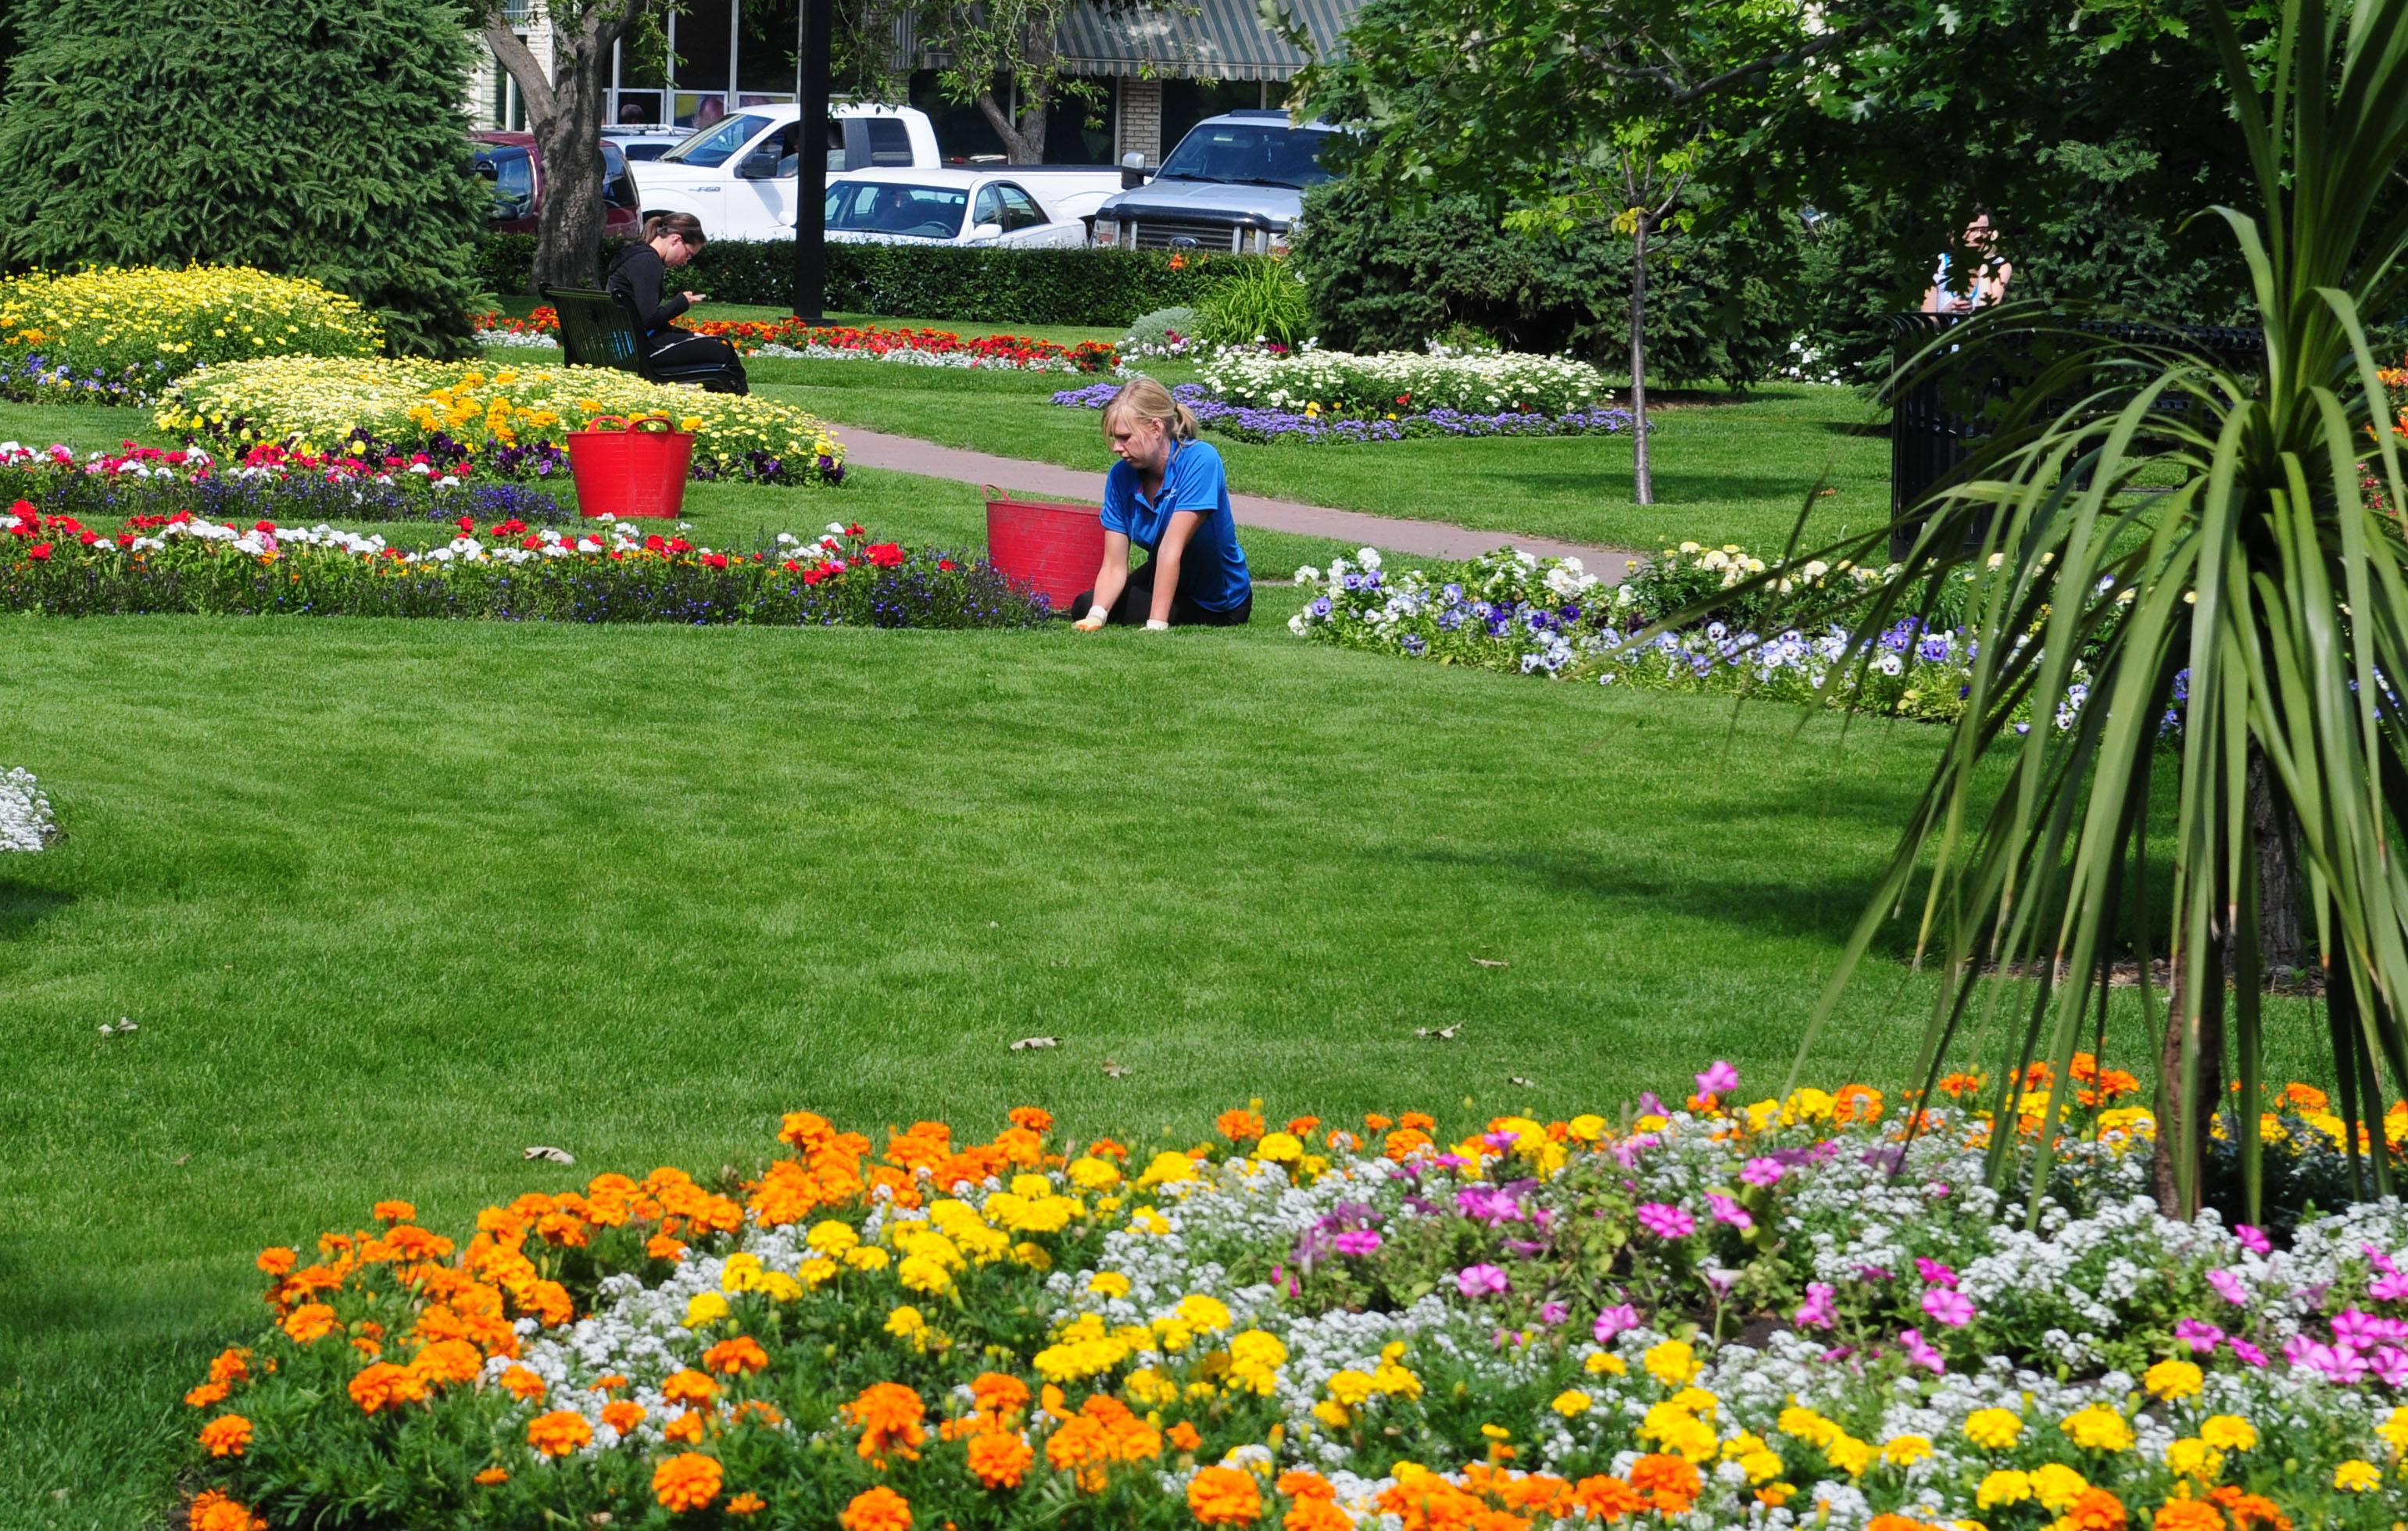 VIBRANT- City Hall Park is in full bloom as students and City employees work to keep the park alive with colour.